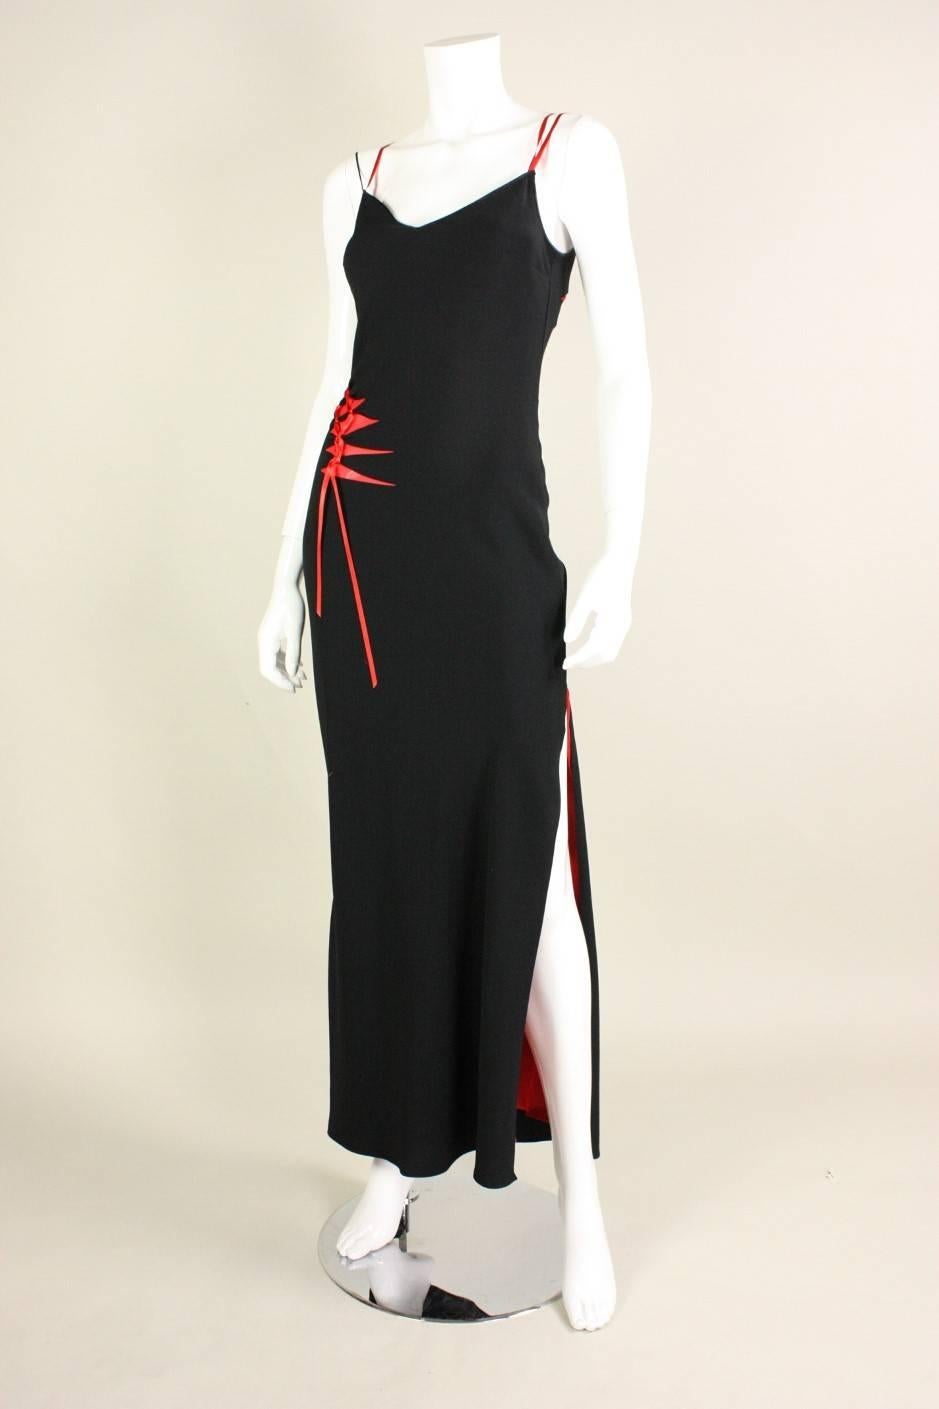 Bias-cut dress from John Galliano dates to the 1990's through the 2000's.  It is made of soft black polyester with a red silk chiffon lining that is exposed through angular cut-outs.  Dramatic side slit.  No closures.

Labeled FR 40/ US 6.  Please